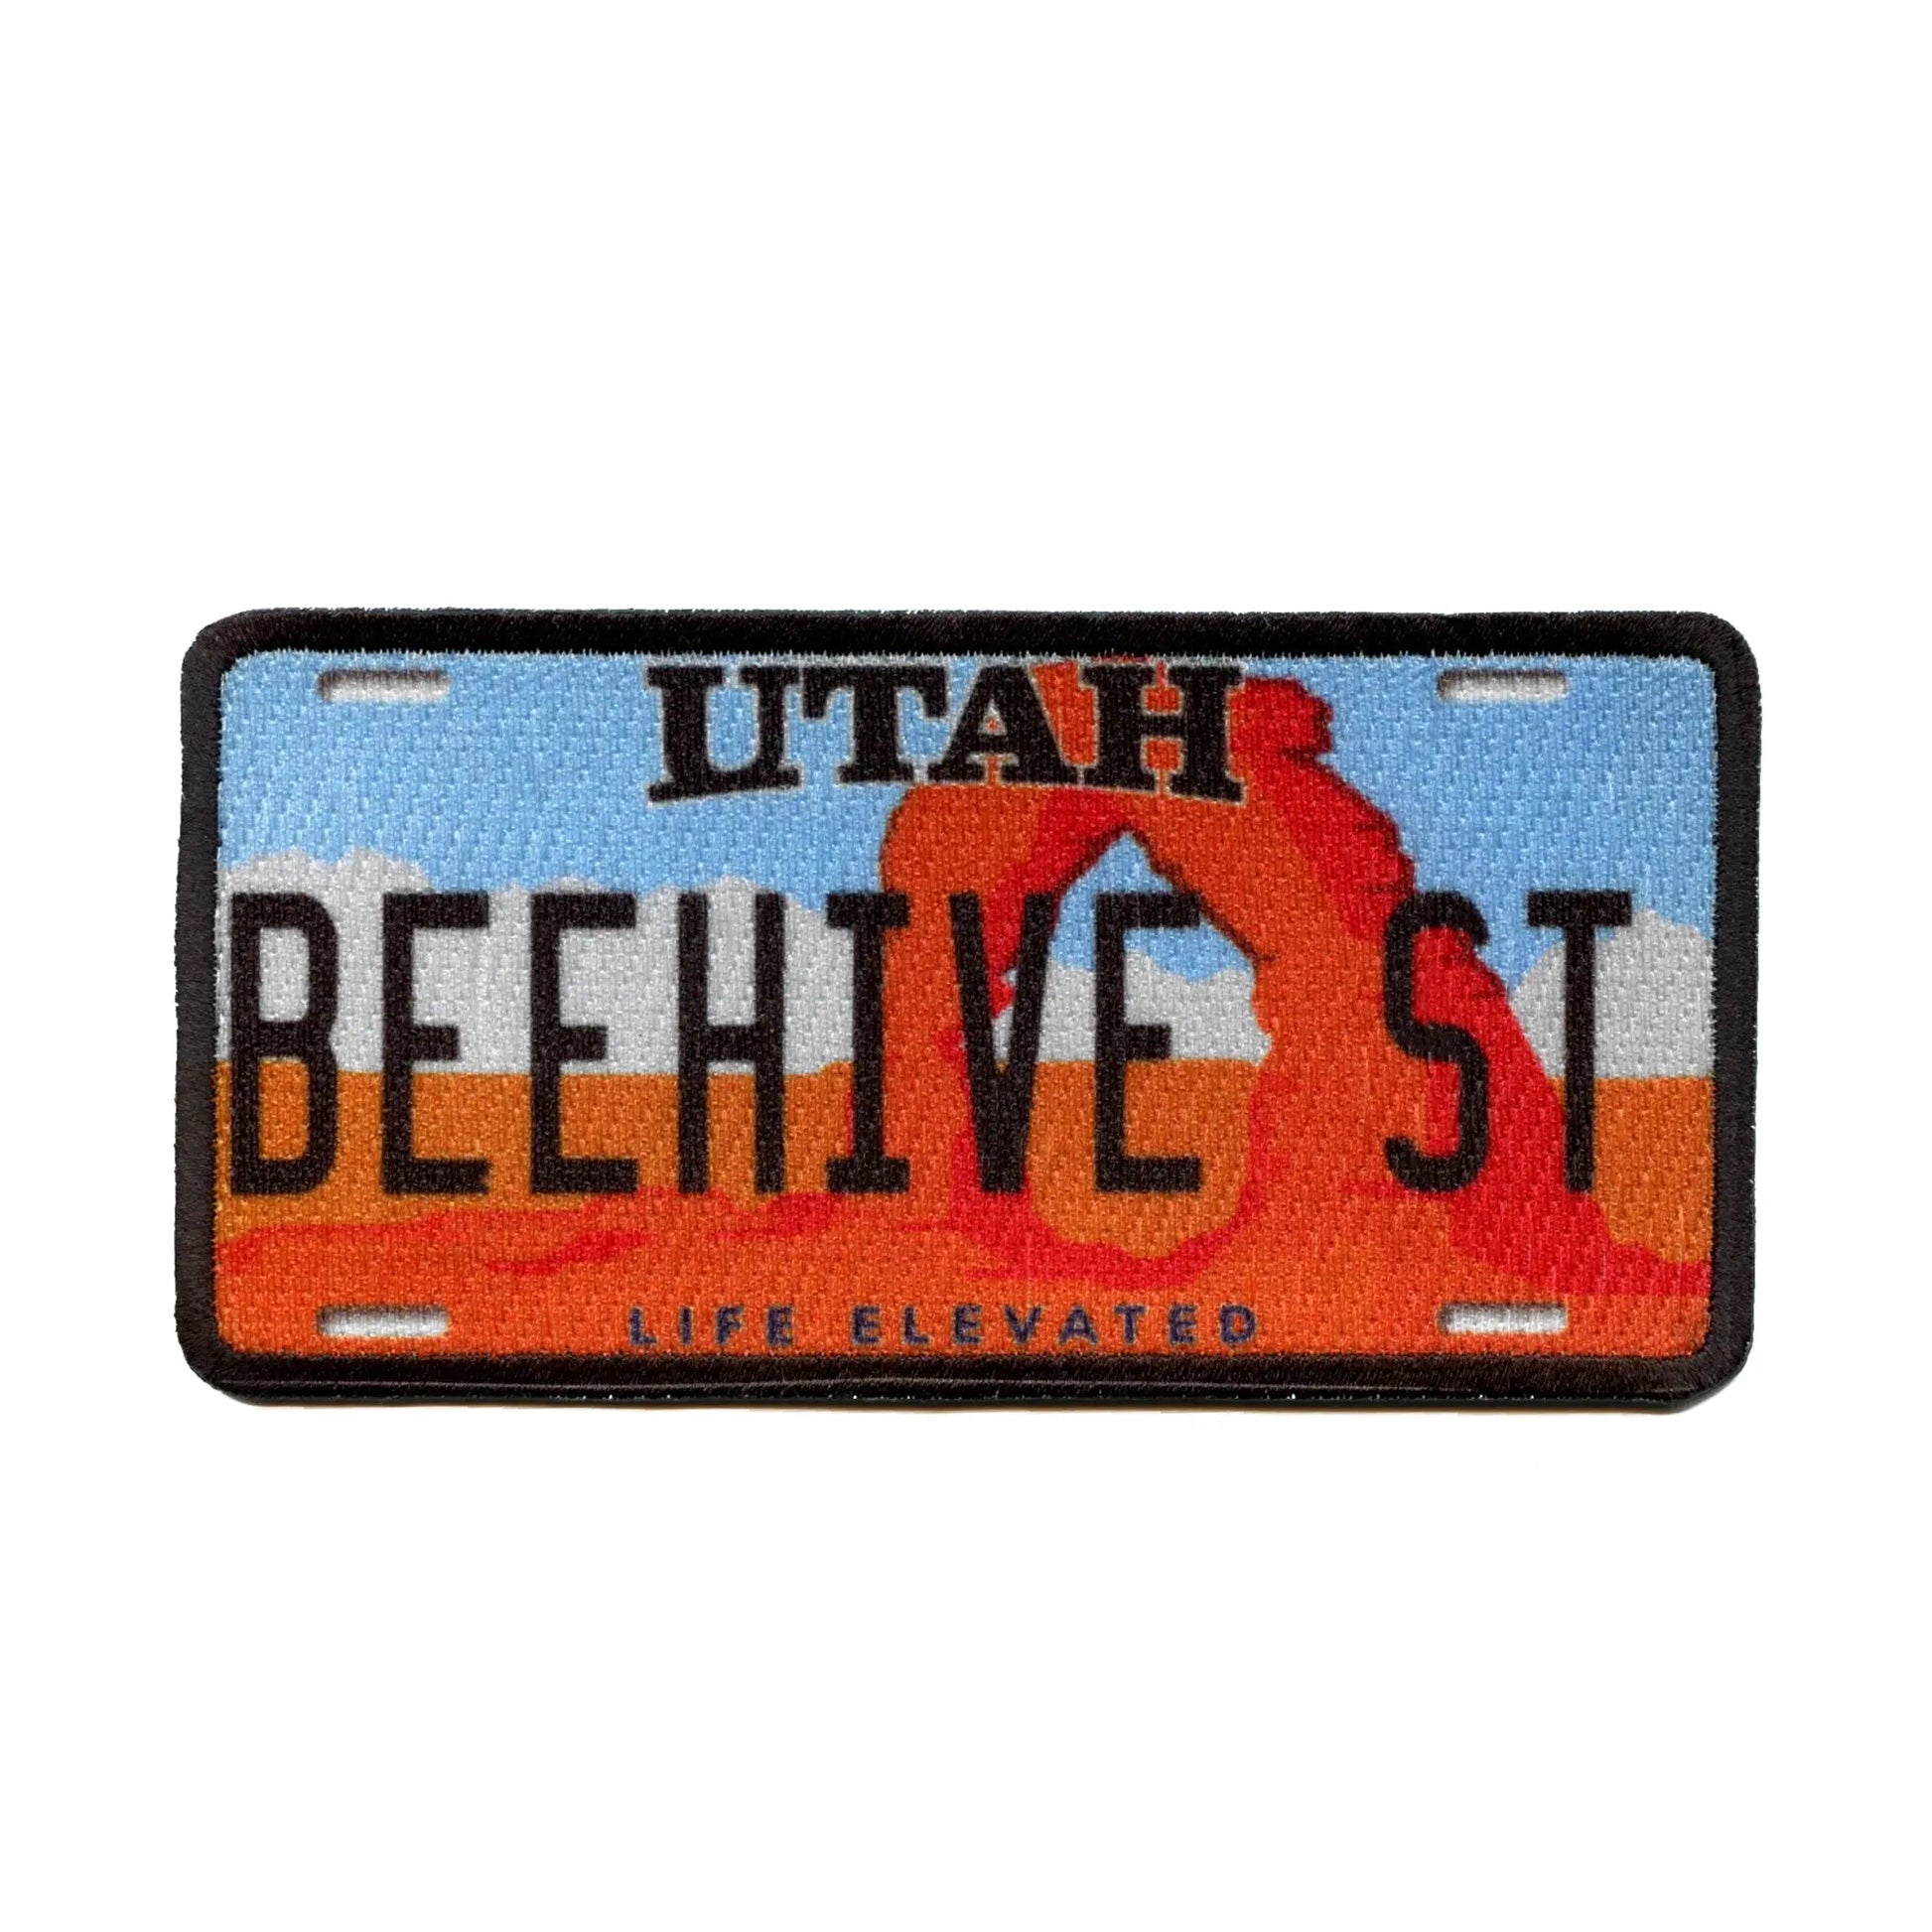 Utah Beehive License Plate Patch Life Elevated Travel Embroidered Iron On 